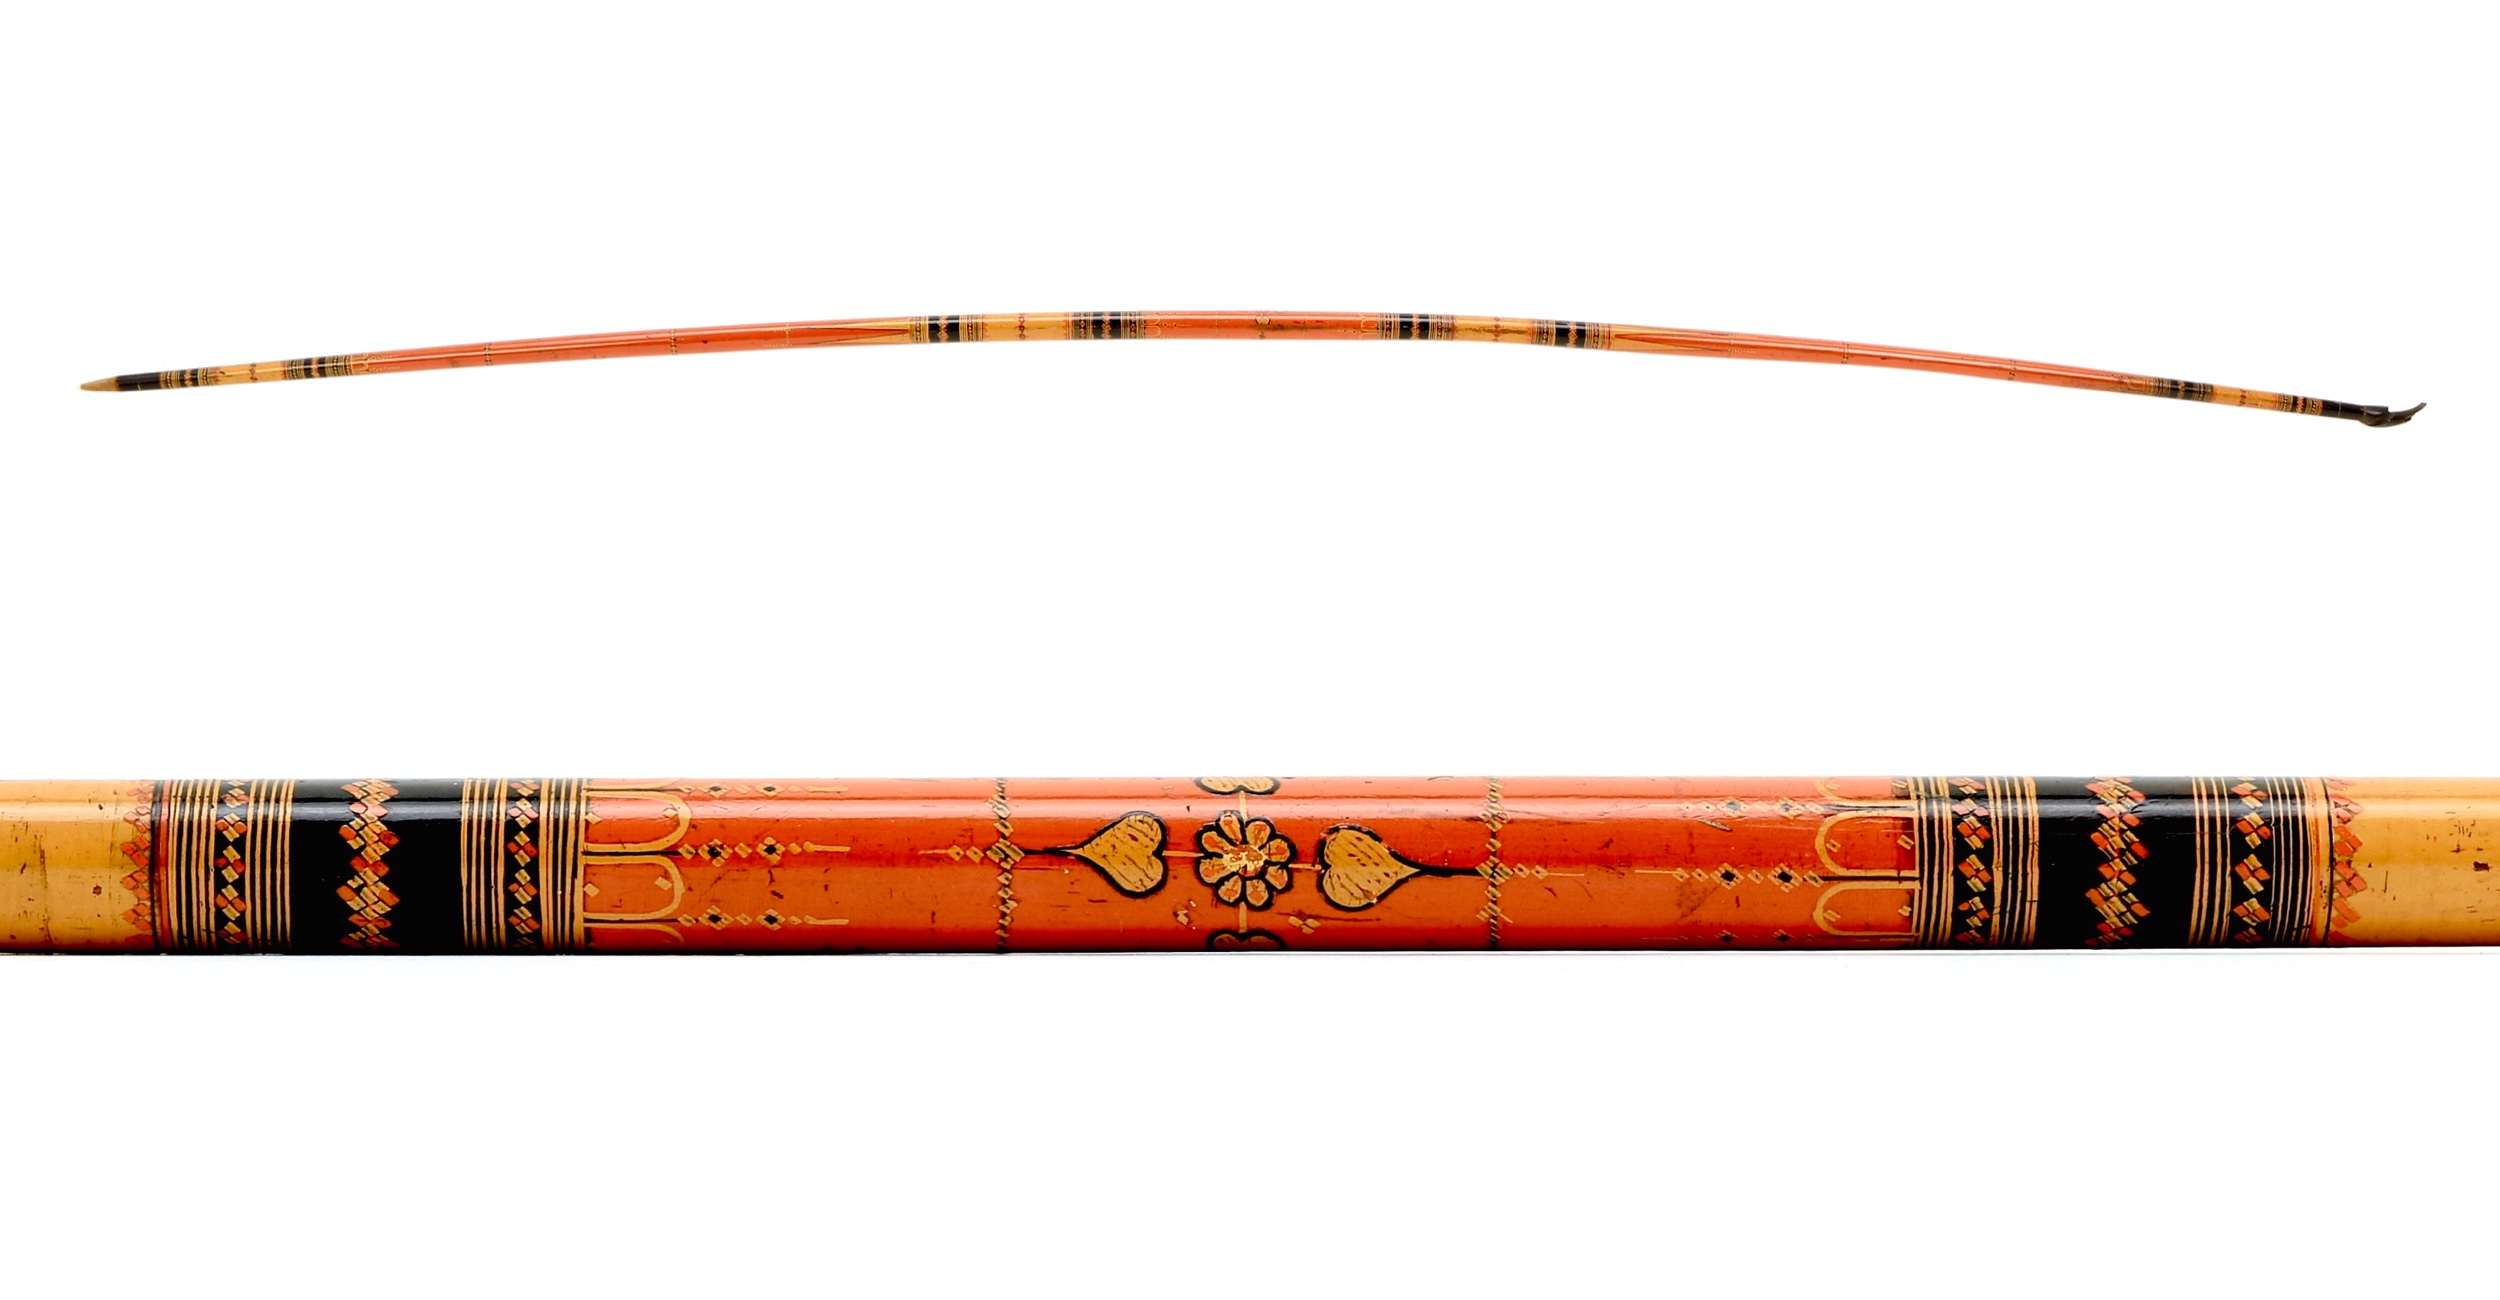 A Sinhalese lacquered longbow